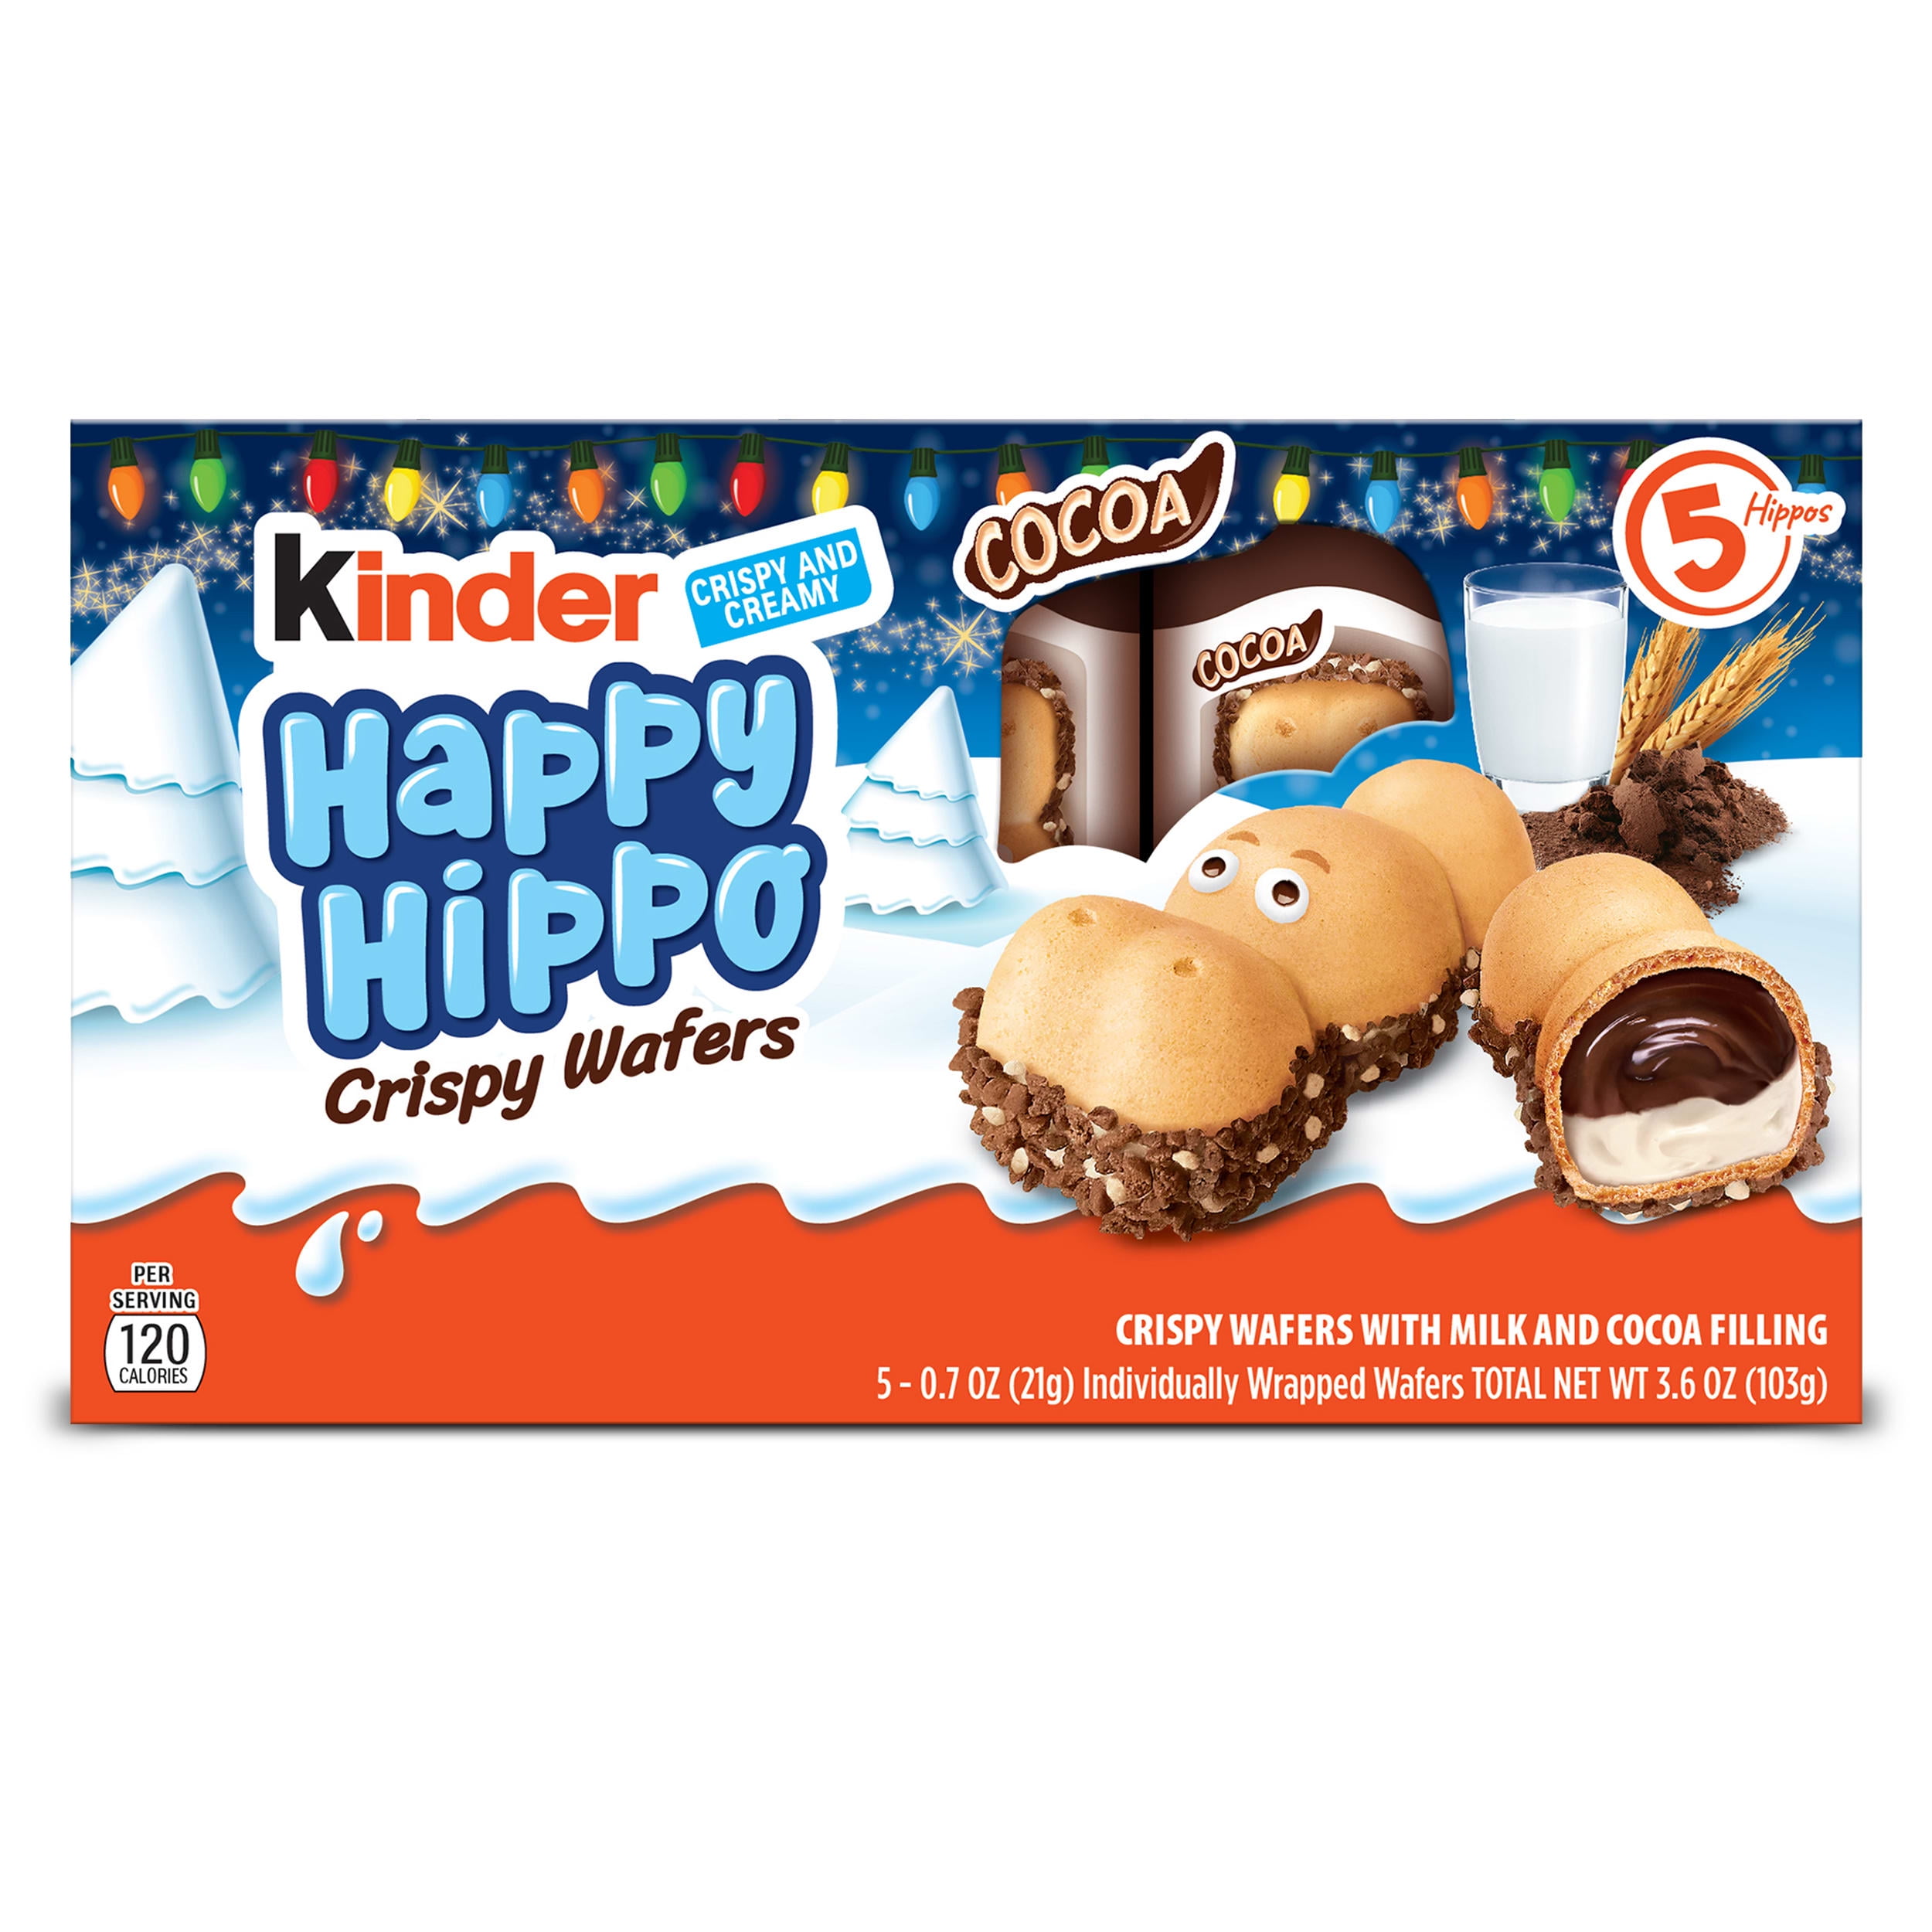 Kinder Happy Hippo Crispy Wafers, Holiday Gift, Great Stocking Stuffers,  3.6 oz, 5 Count